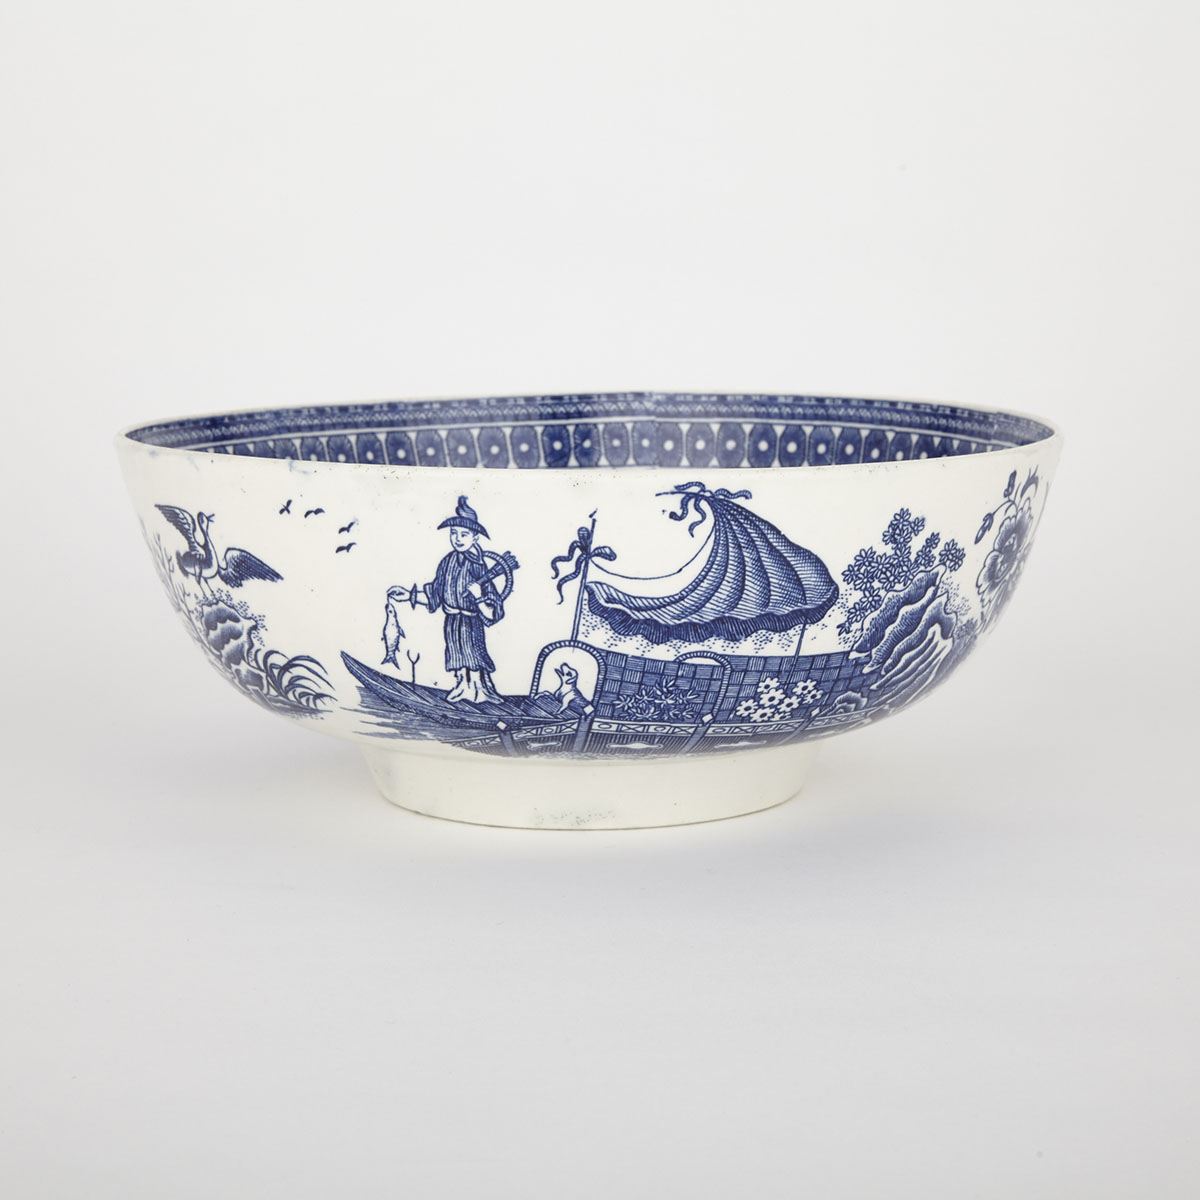 Worcester ‘Fisherman and Cormorant’ Punch Bowl, c.1775-90